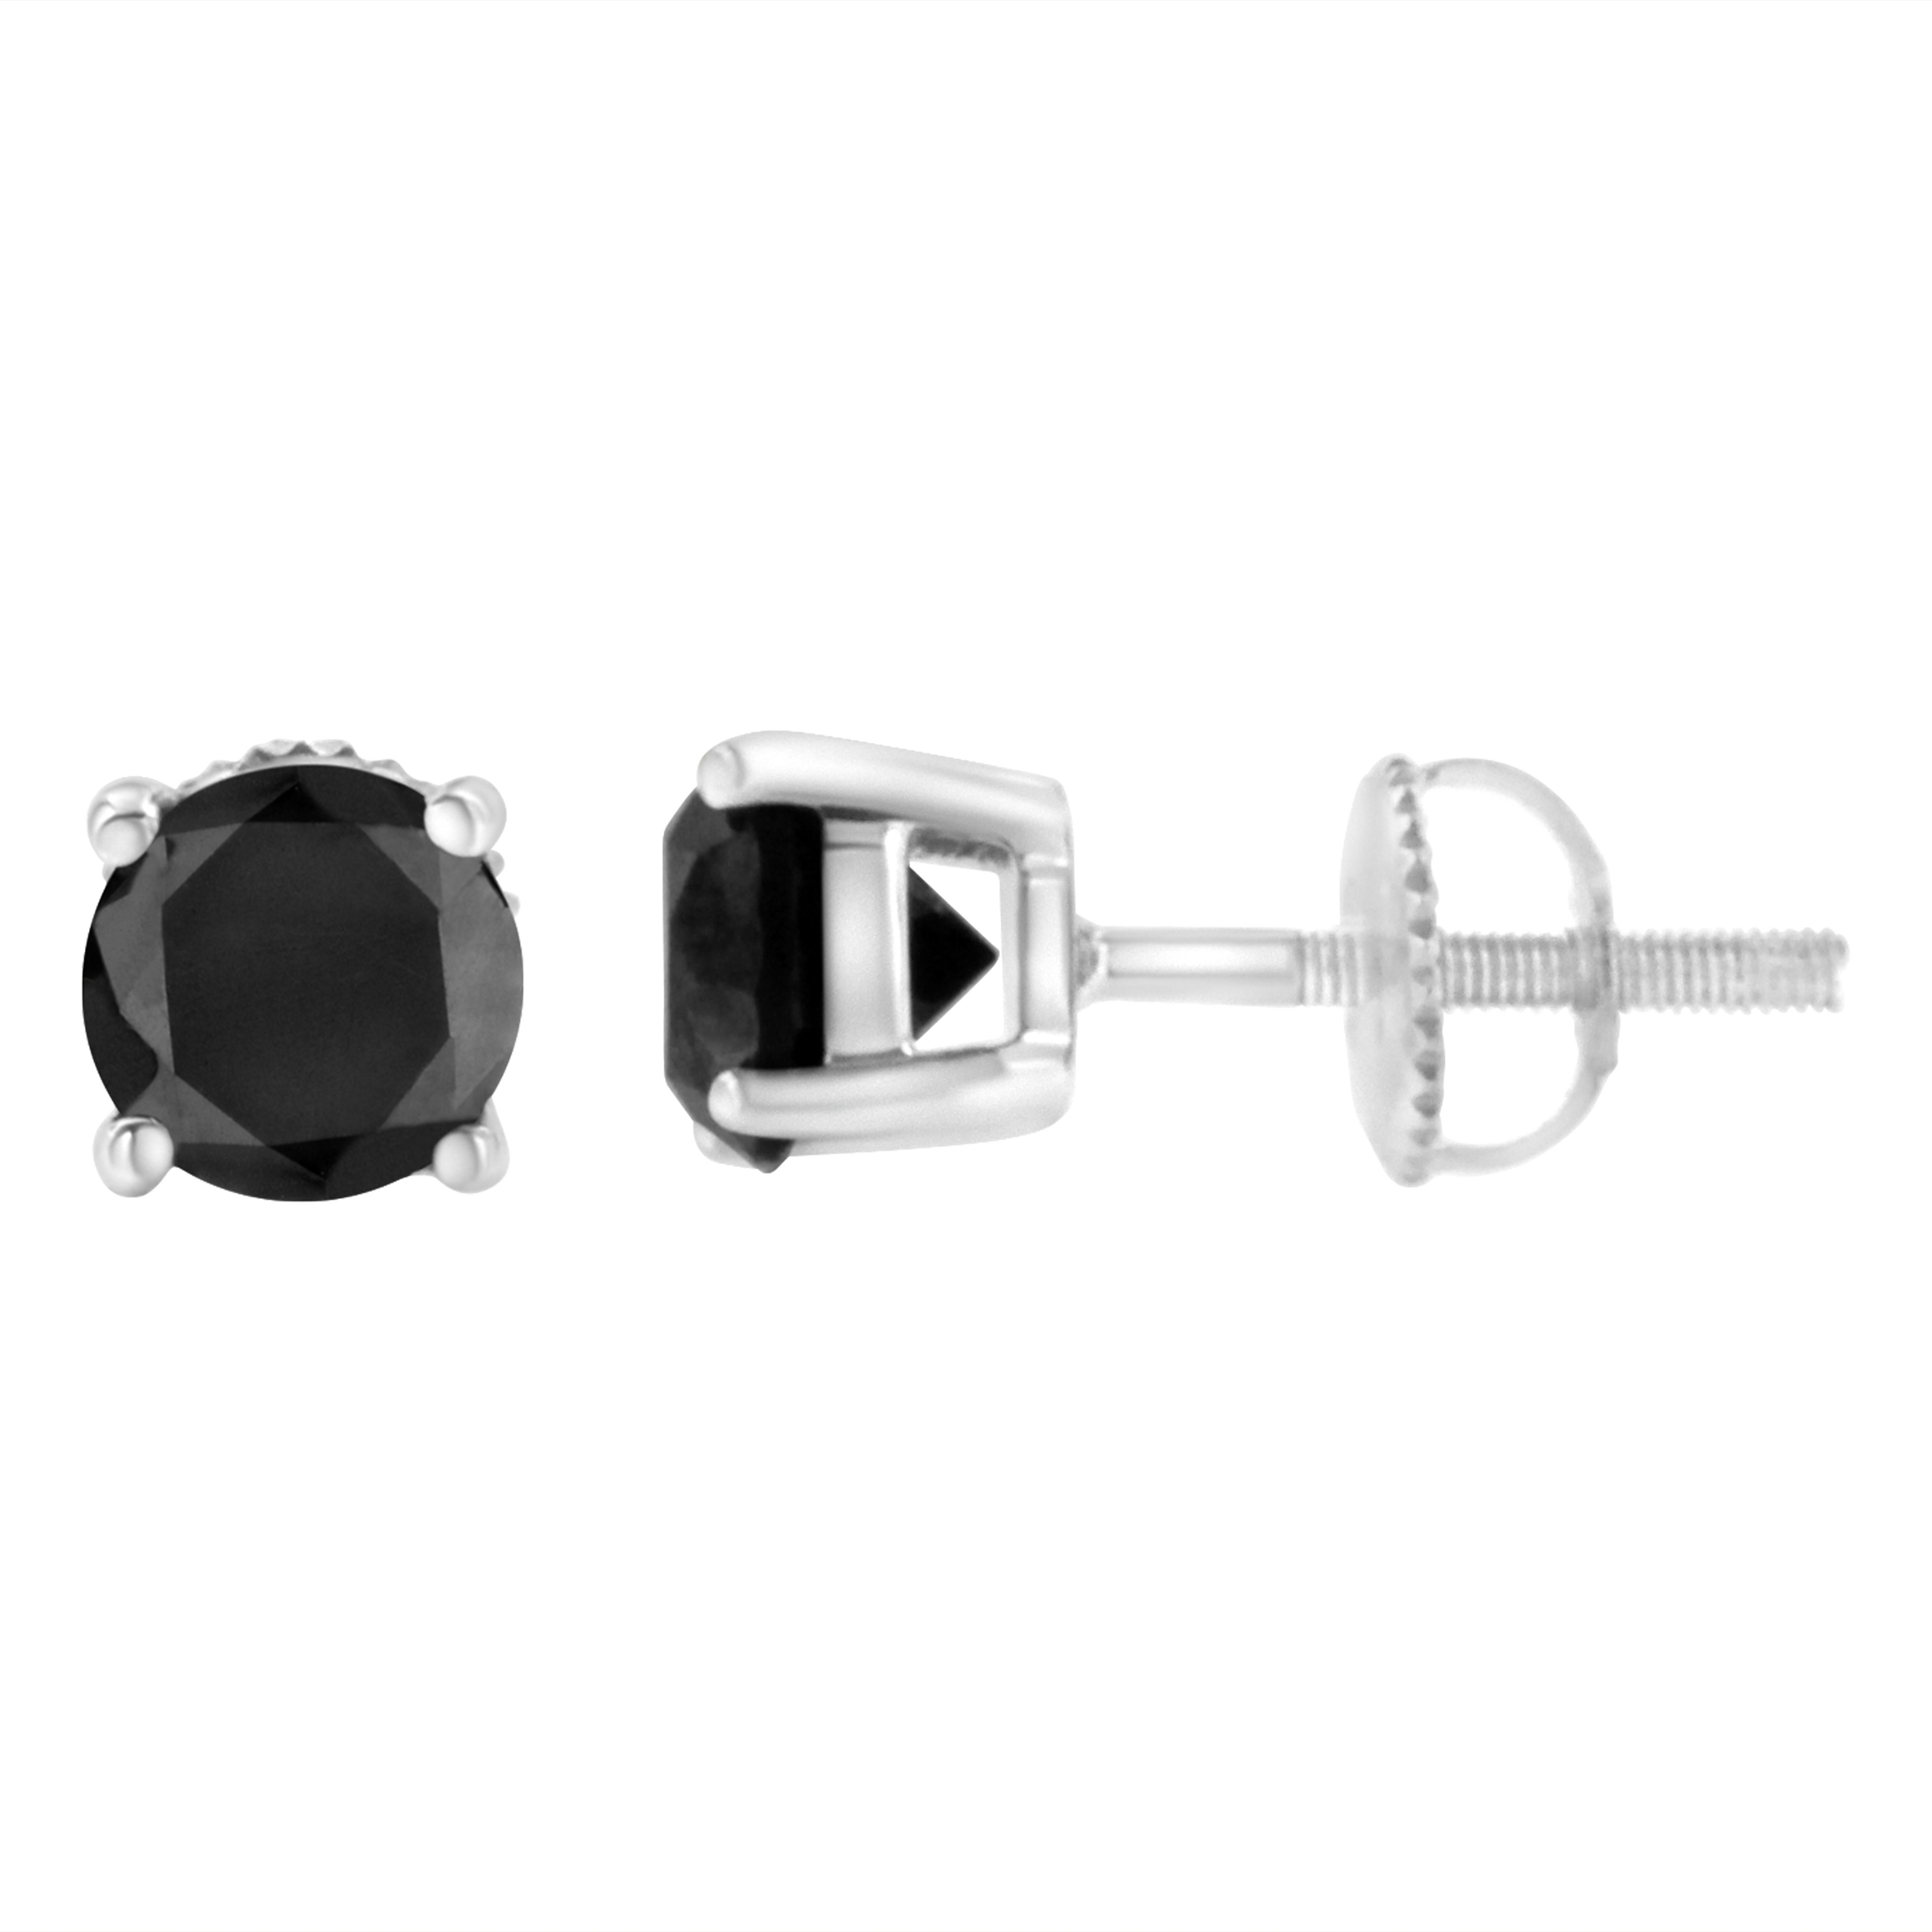 Elegant and timeless, these gorgeous 14K white gold solitaire stud earrings feature bold and beautiful heat treated, color enhanced black diamonds. The earrings feature screwback closures. The notched posts and friction backs keep these pierced